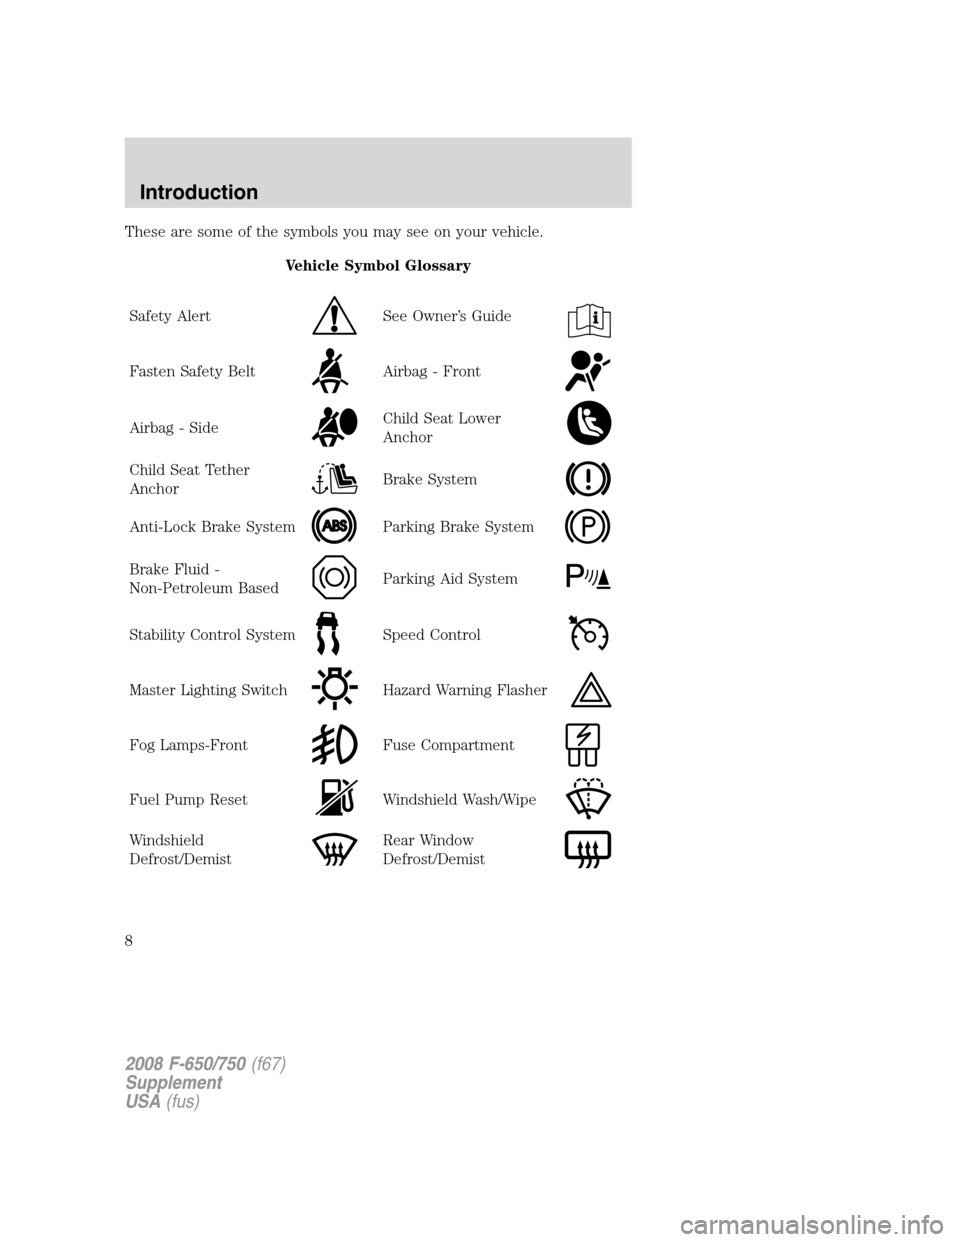 FORD F650 2008 11.G Owners Manual These are some of the symbols you may see on your vehicle.
Vehicle Symbol Glossary
Safety Alert
See Owner’s Guide
Fasten Safety BeltAirbag - Front
Airbag - SideChild Seat Lower
Anchor
Child Seat Tet